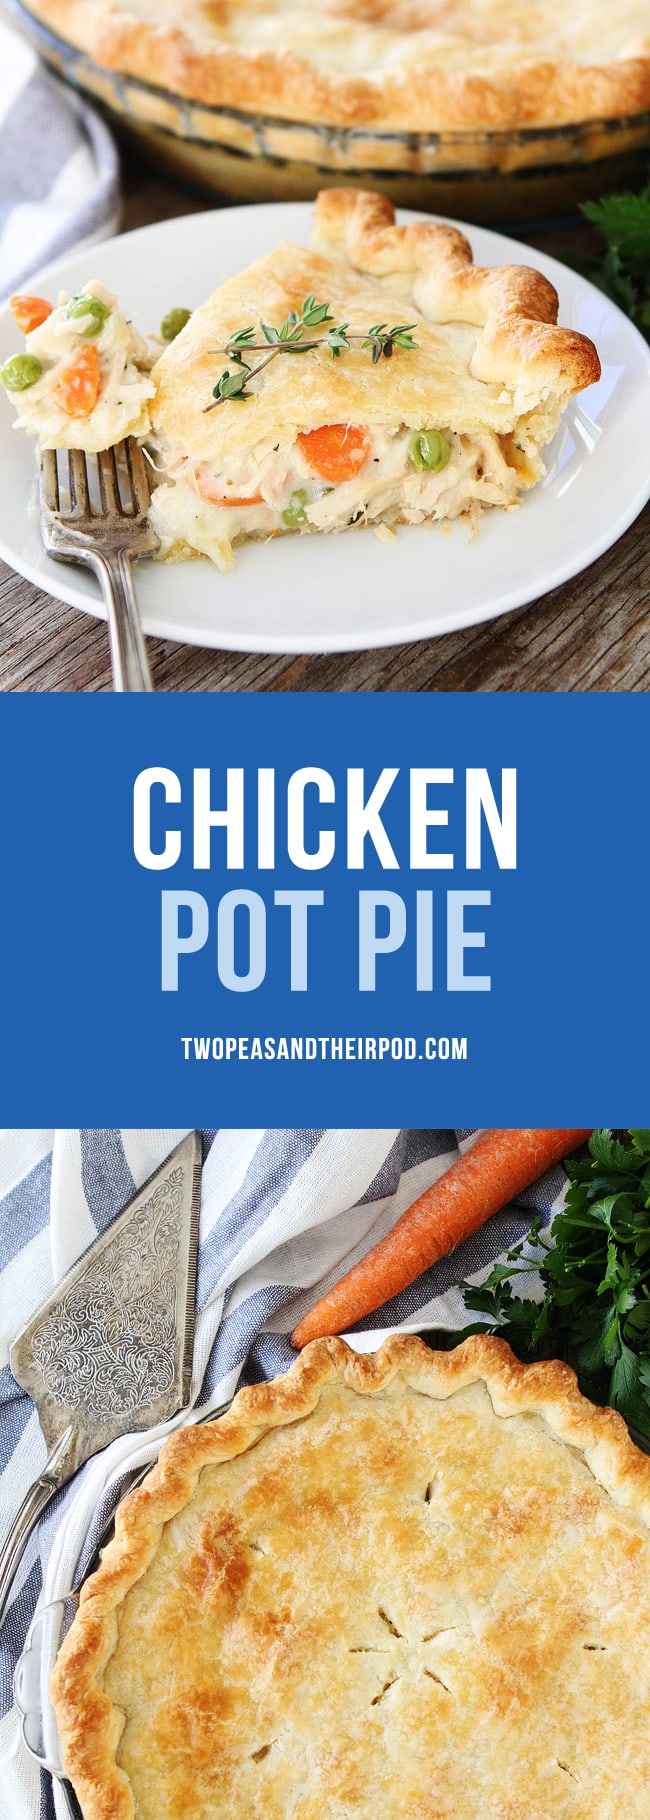 The BEST Chicken Pot Pie Recipe. This easy homemade chicken pot pie is a family favorite recipe. Use rotisserie chicken or leftover turkey for an easy weeknight dinner. #chicken #potpie #dinner #chickenrecipe Visit twopeasandtheirpod.com for more simple, fresh, and family friendly meals. 